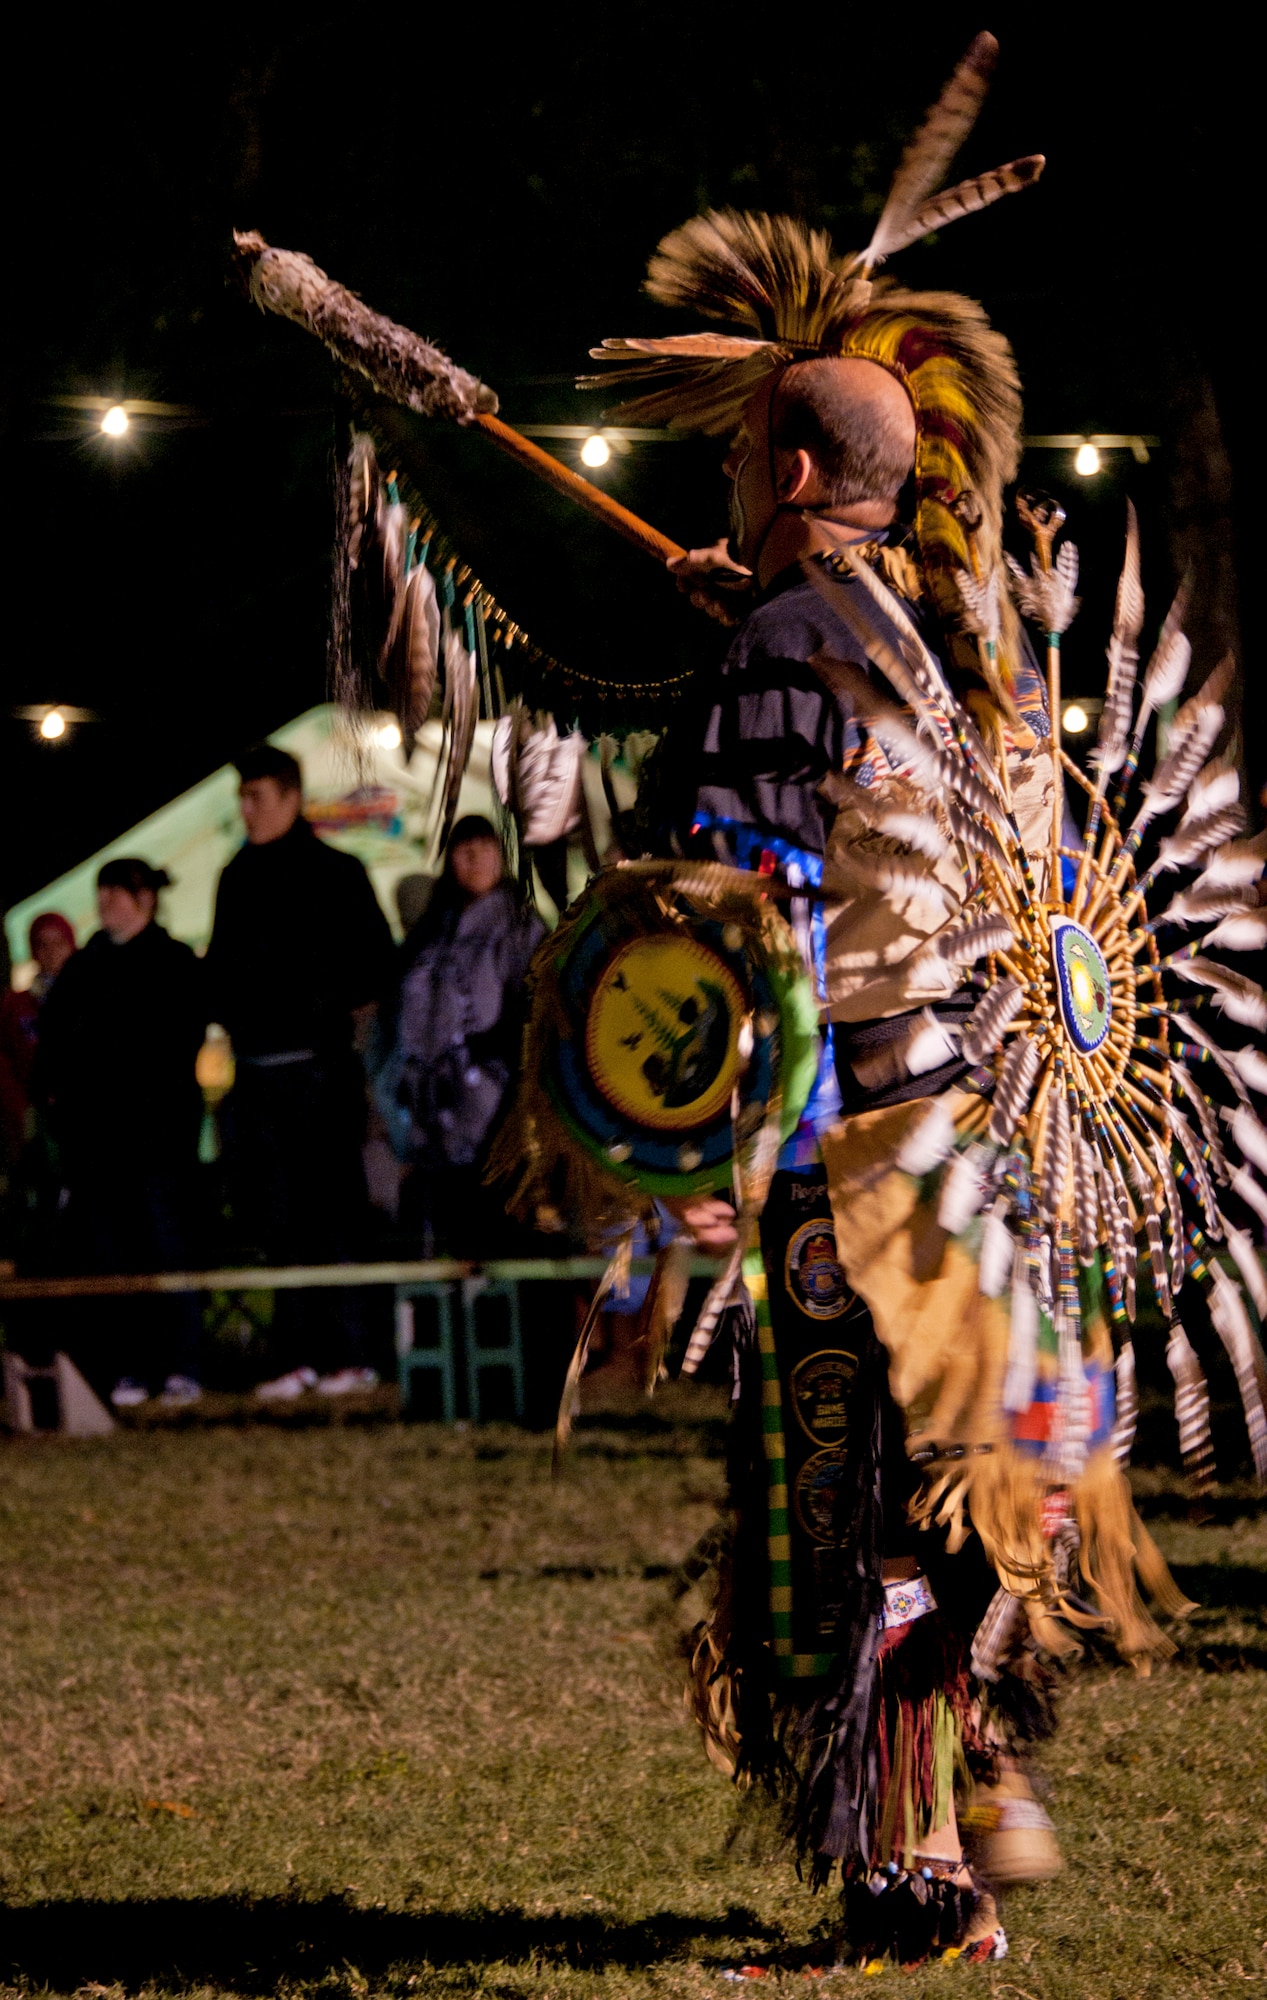 A Native American dancer directs others during a performance at the 23rd Annual Thunderbird Intertribal Powwow Nov. 5 in Niceville, Fla.  November is the 25th anniversary of the National American Indian/Alaskan Native Heritage Month.  (U.S. Air Force photo/ Samuel King Jr.)